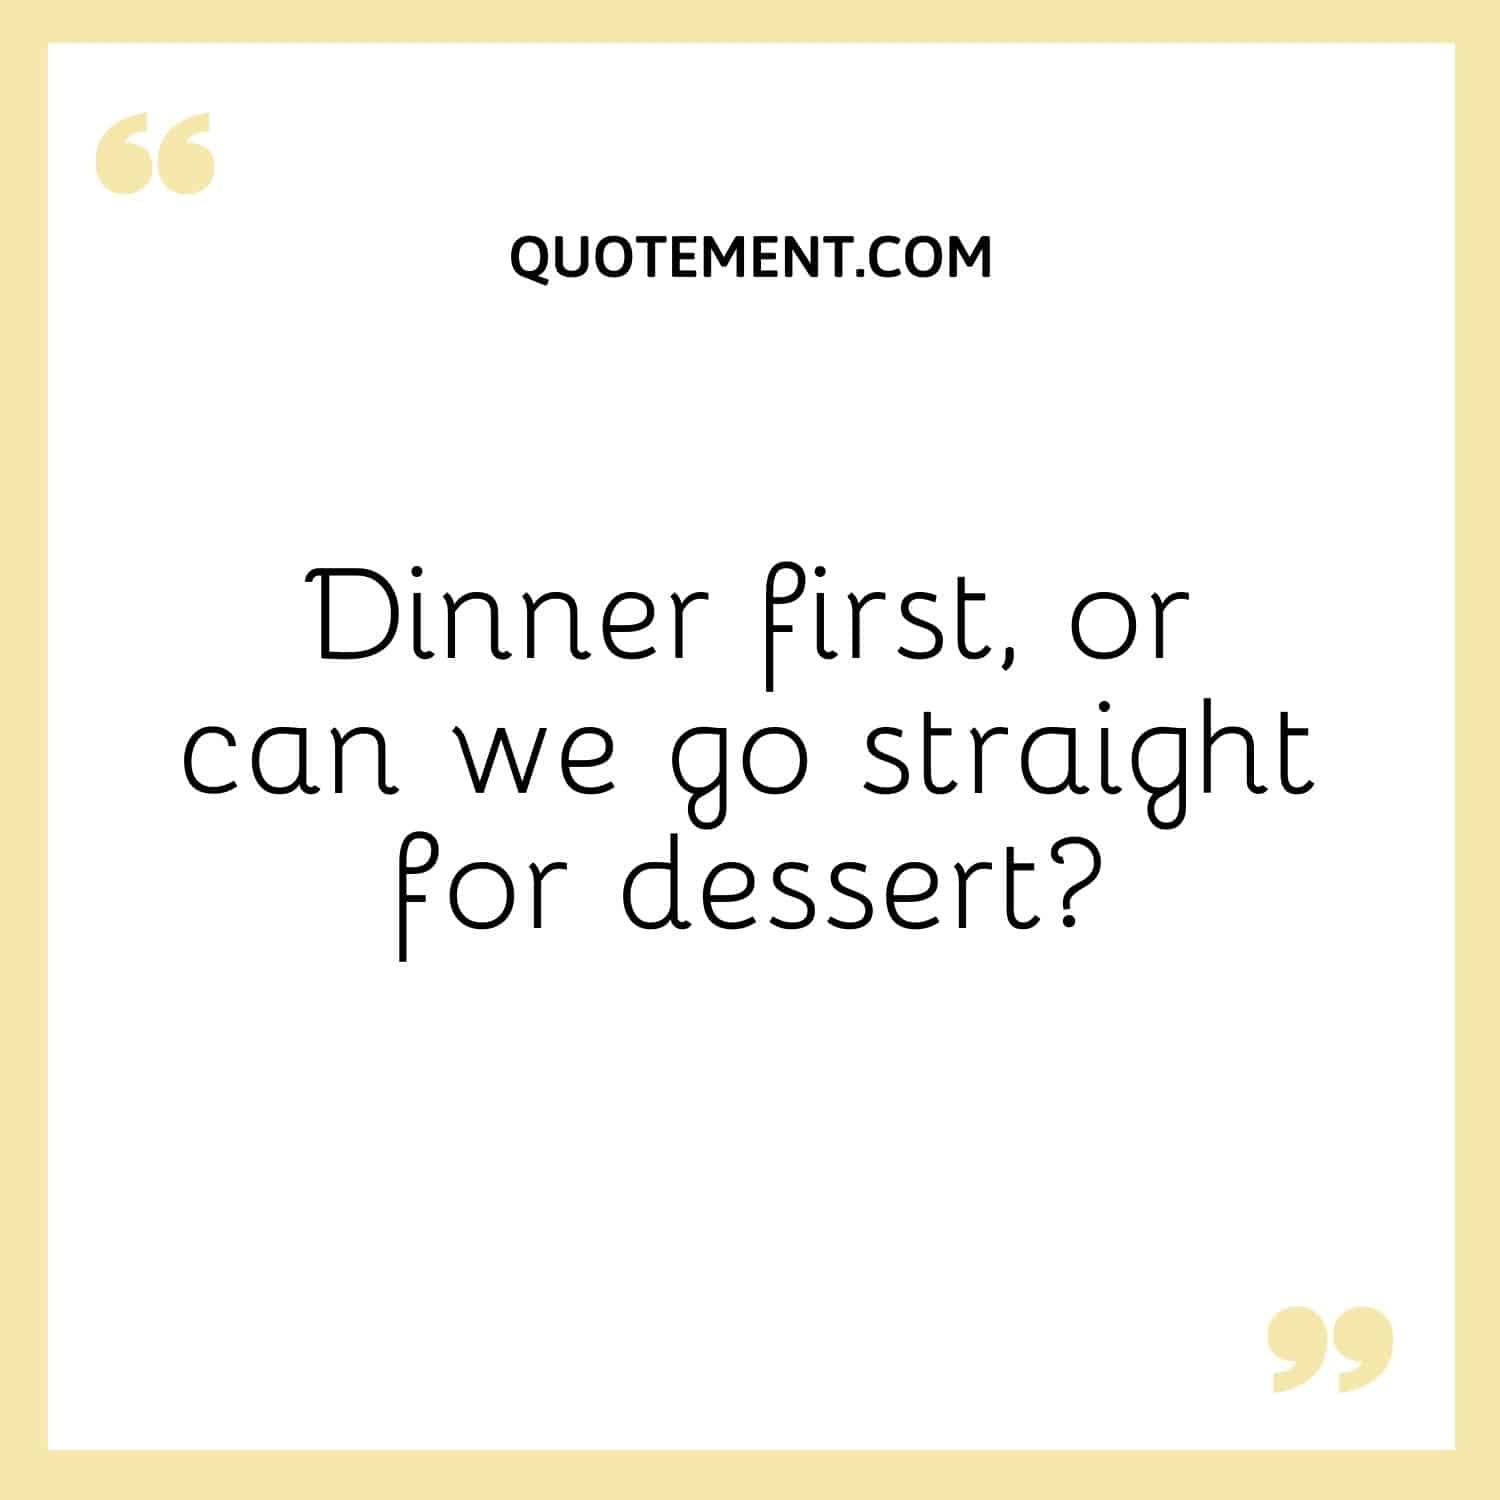 Dinner first, or can we go straight for dessert